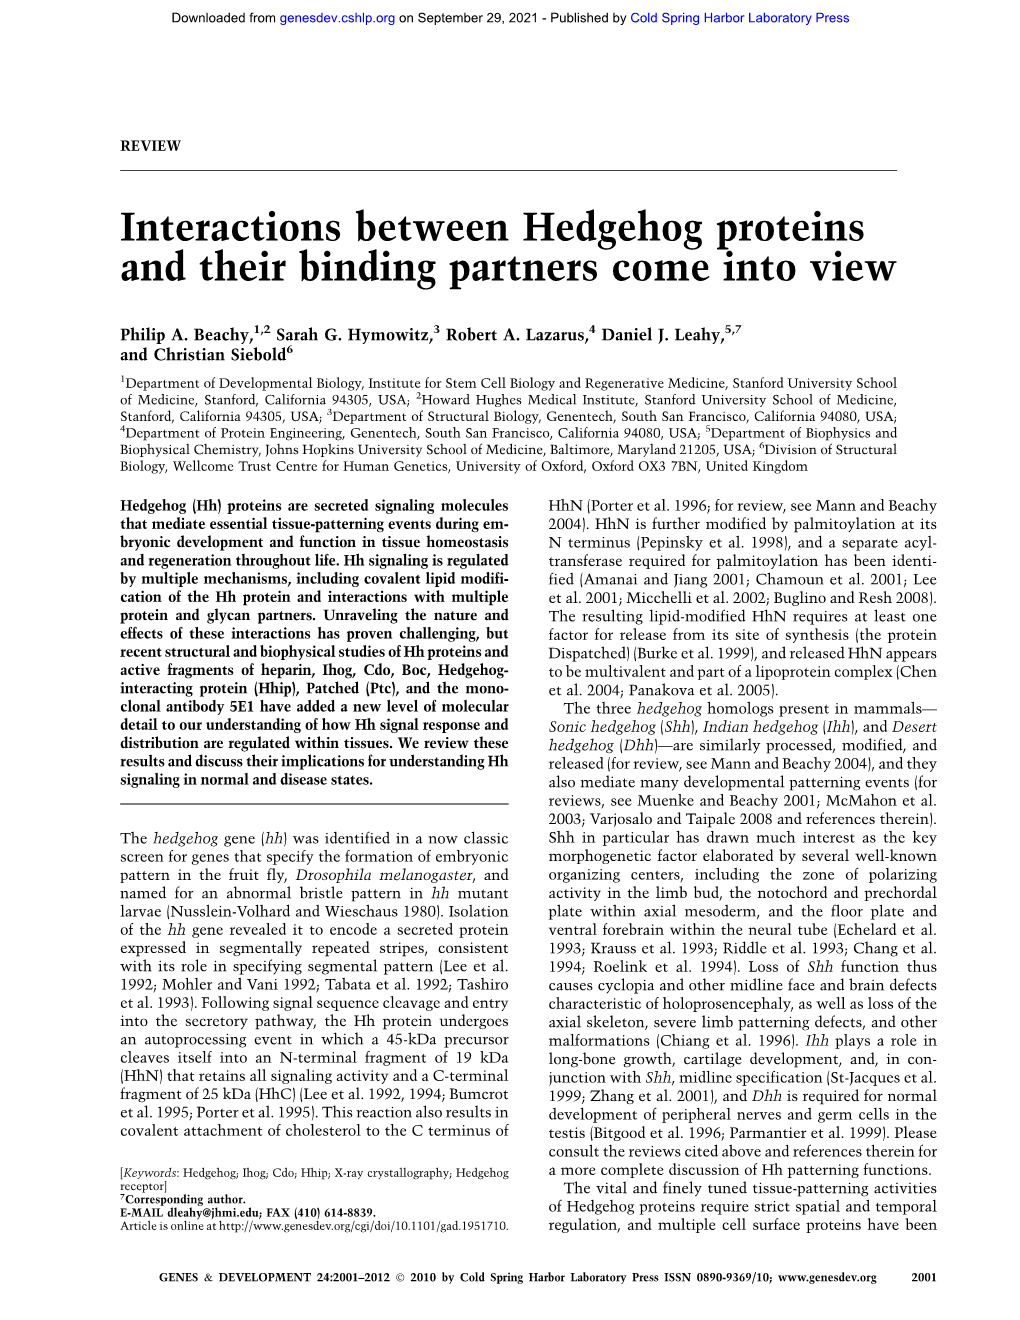 Interactions Between Hedgehog Proteins and Their Binding Partners Come Into View